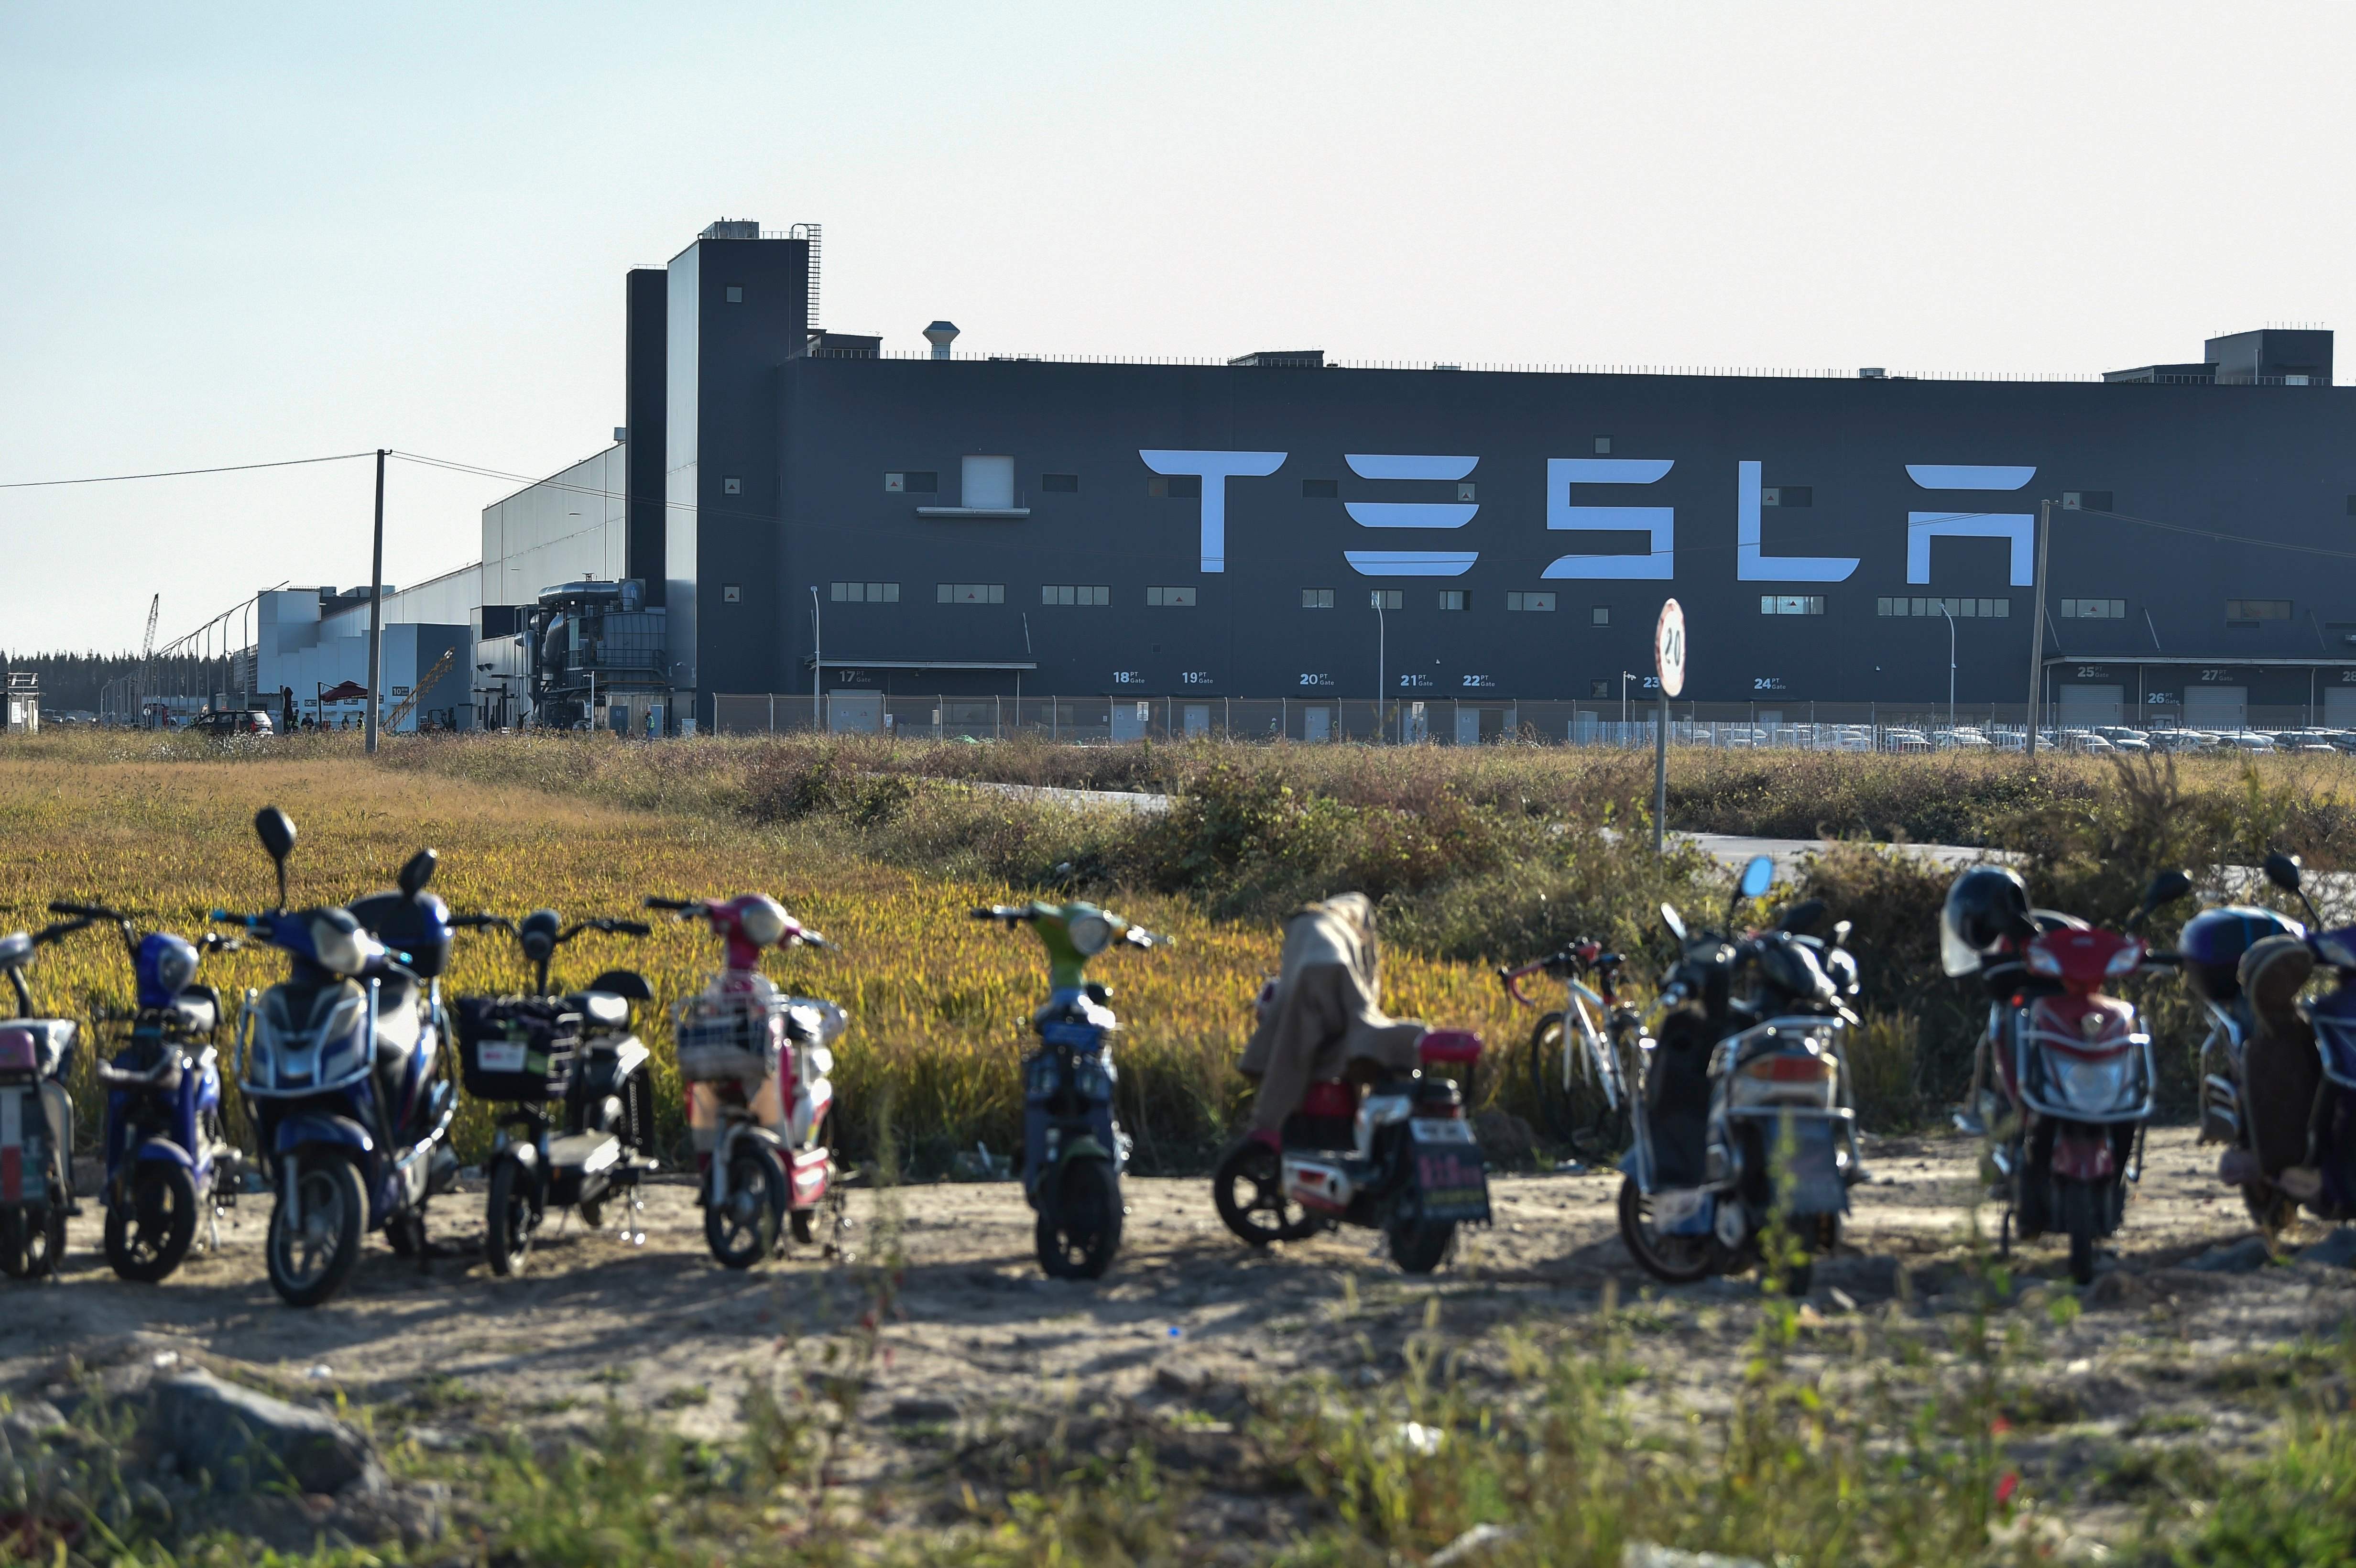 Scooters are parked near the new Tesla factory in Shanghai. The Chinese economy has slowed but Beijing has the power to kick-start a virtuous cycle of growth and development. Photo: AFP